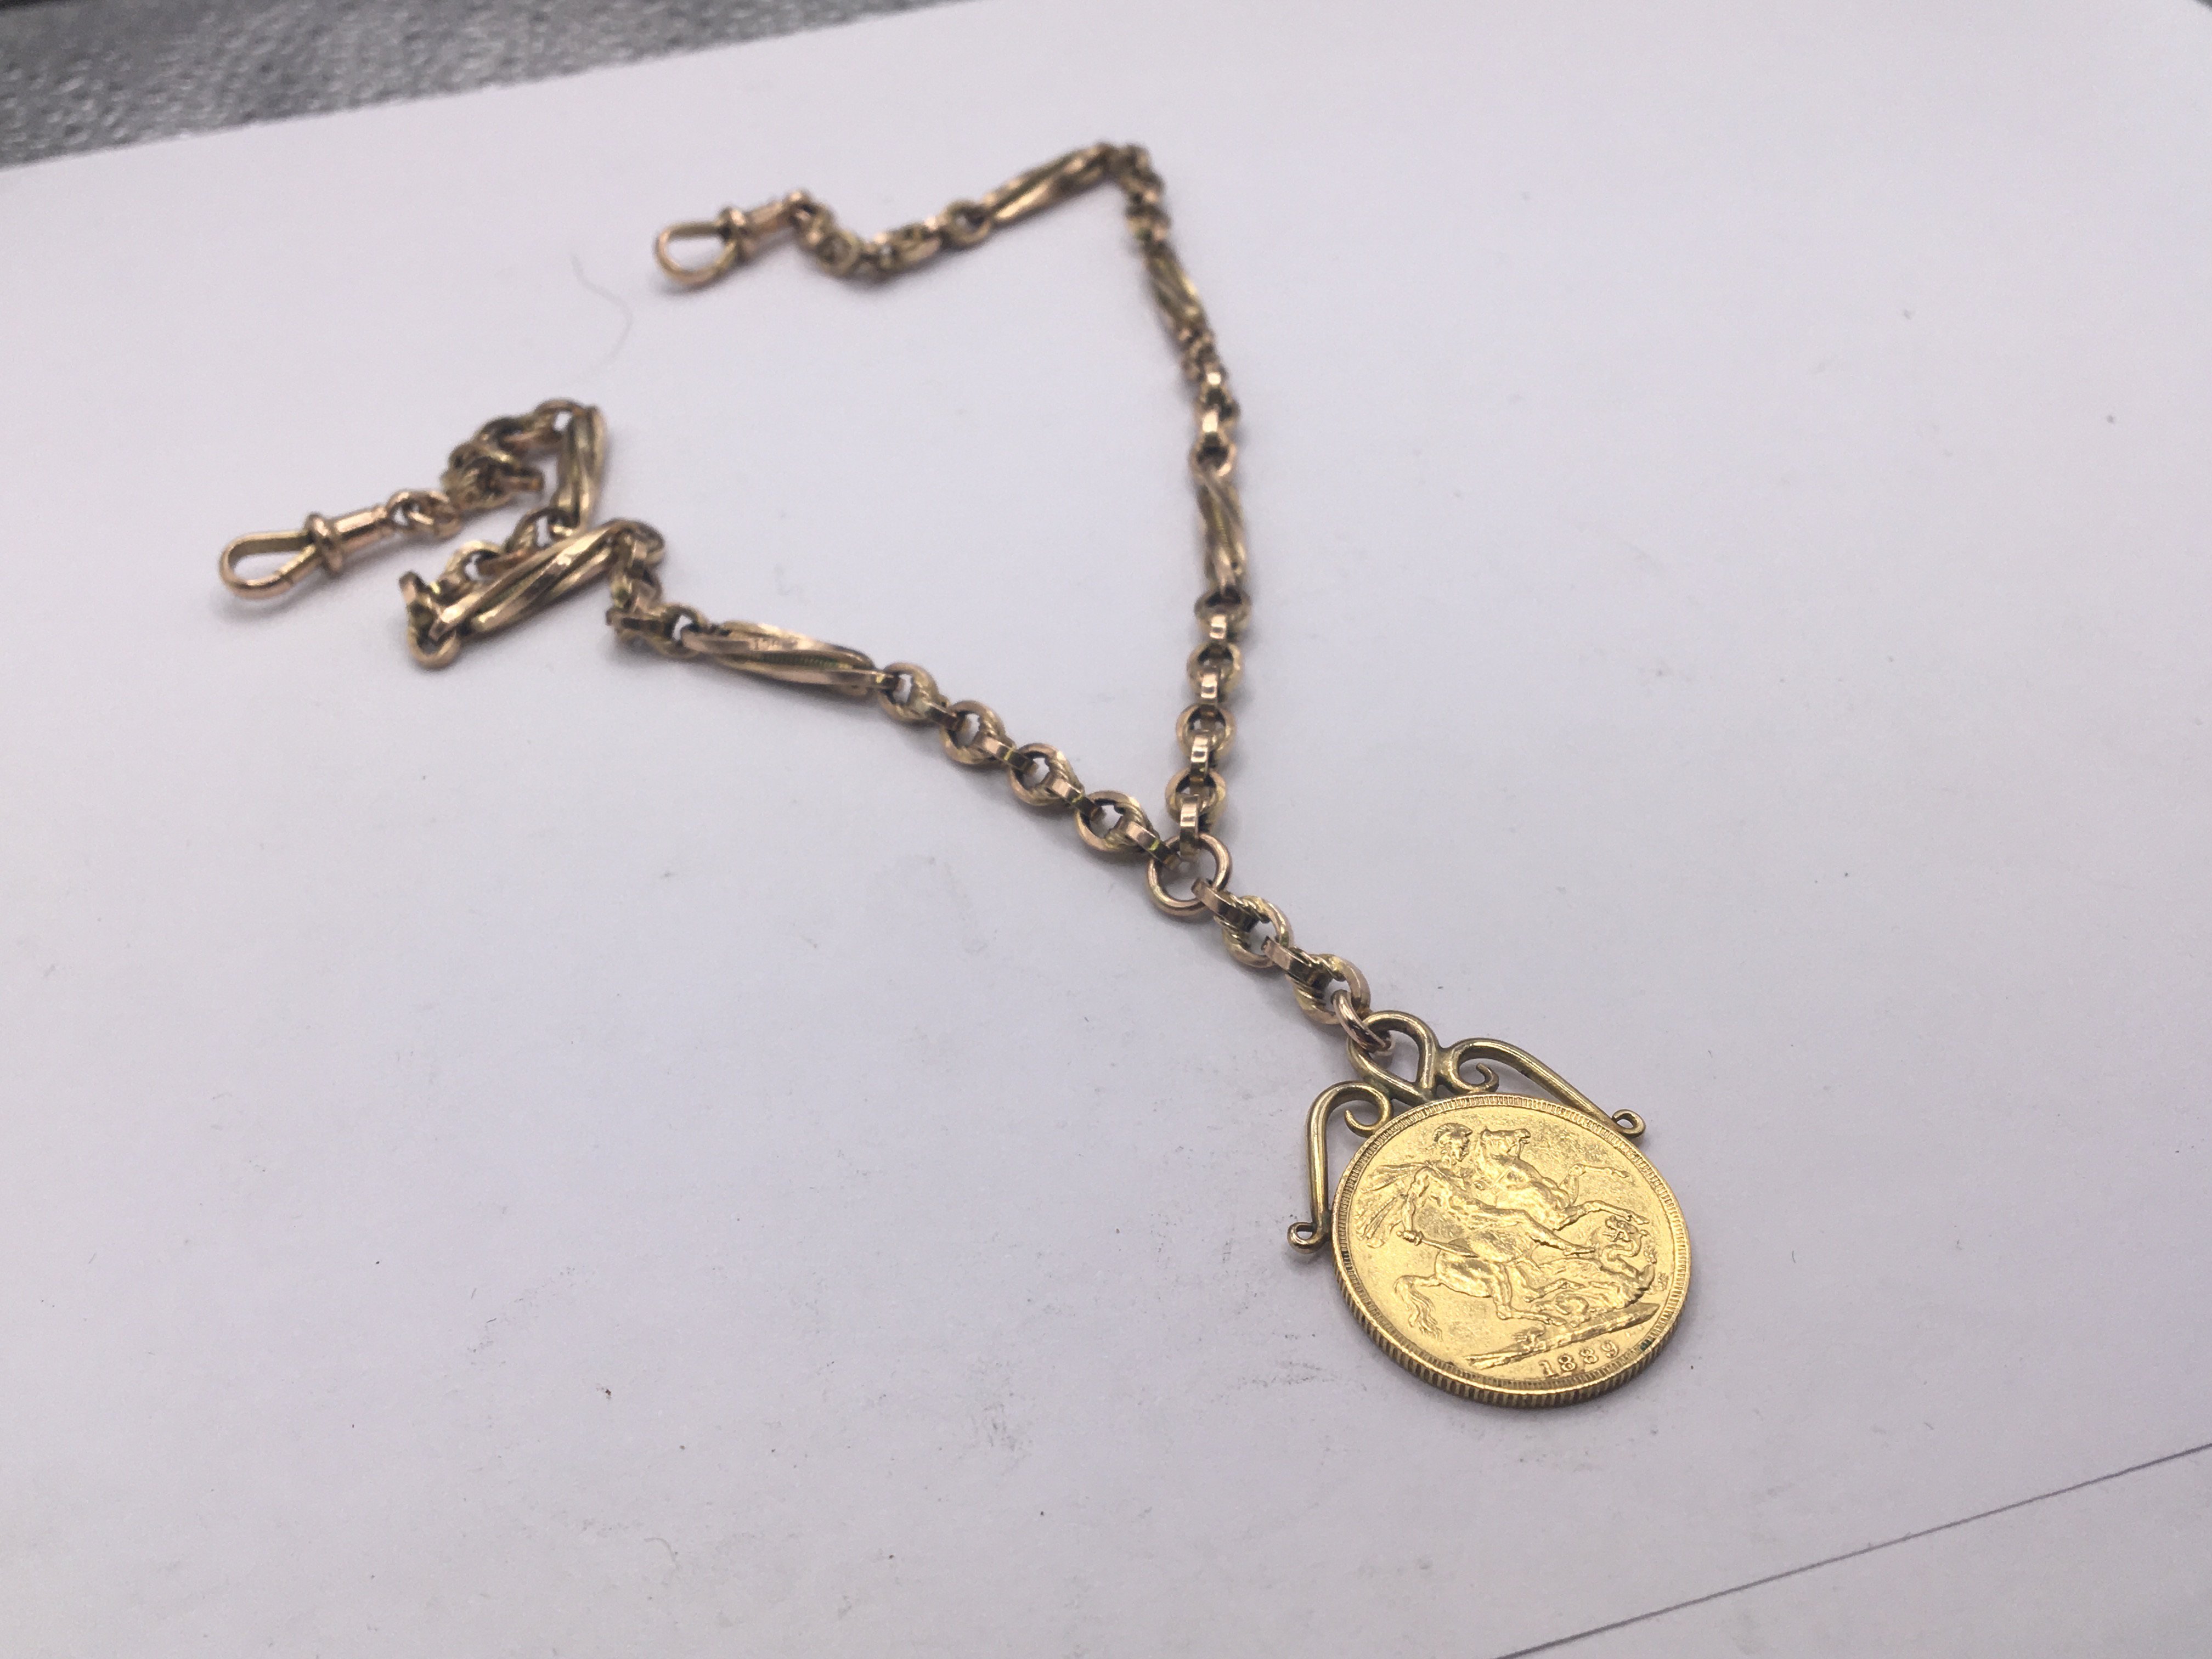 A Victorian 1899 sovereign converted to a pendent